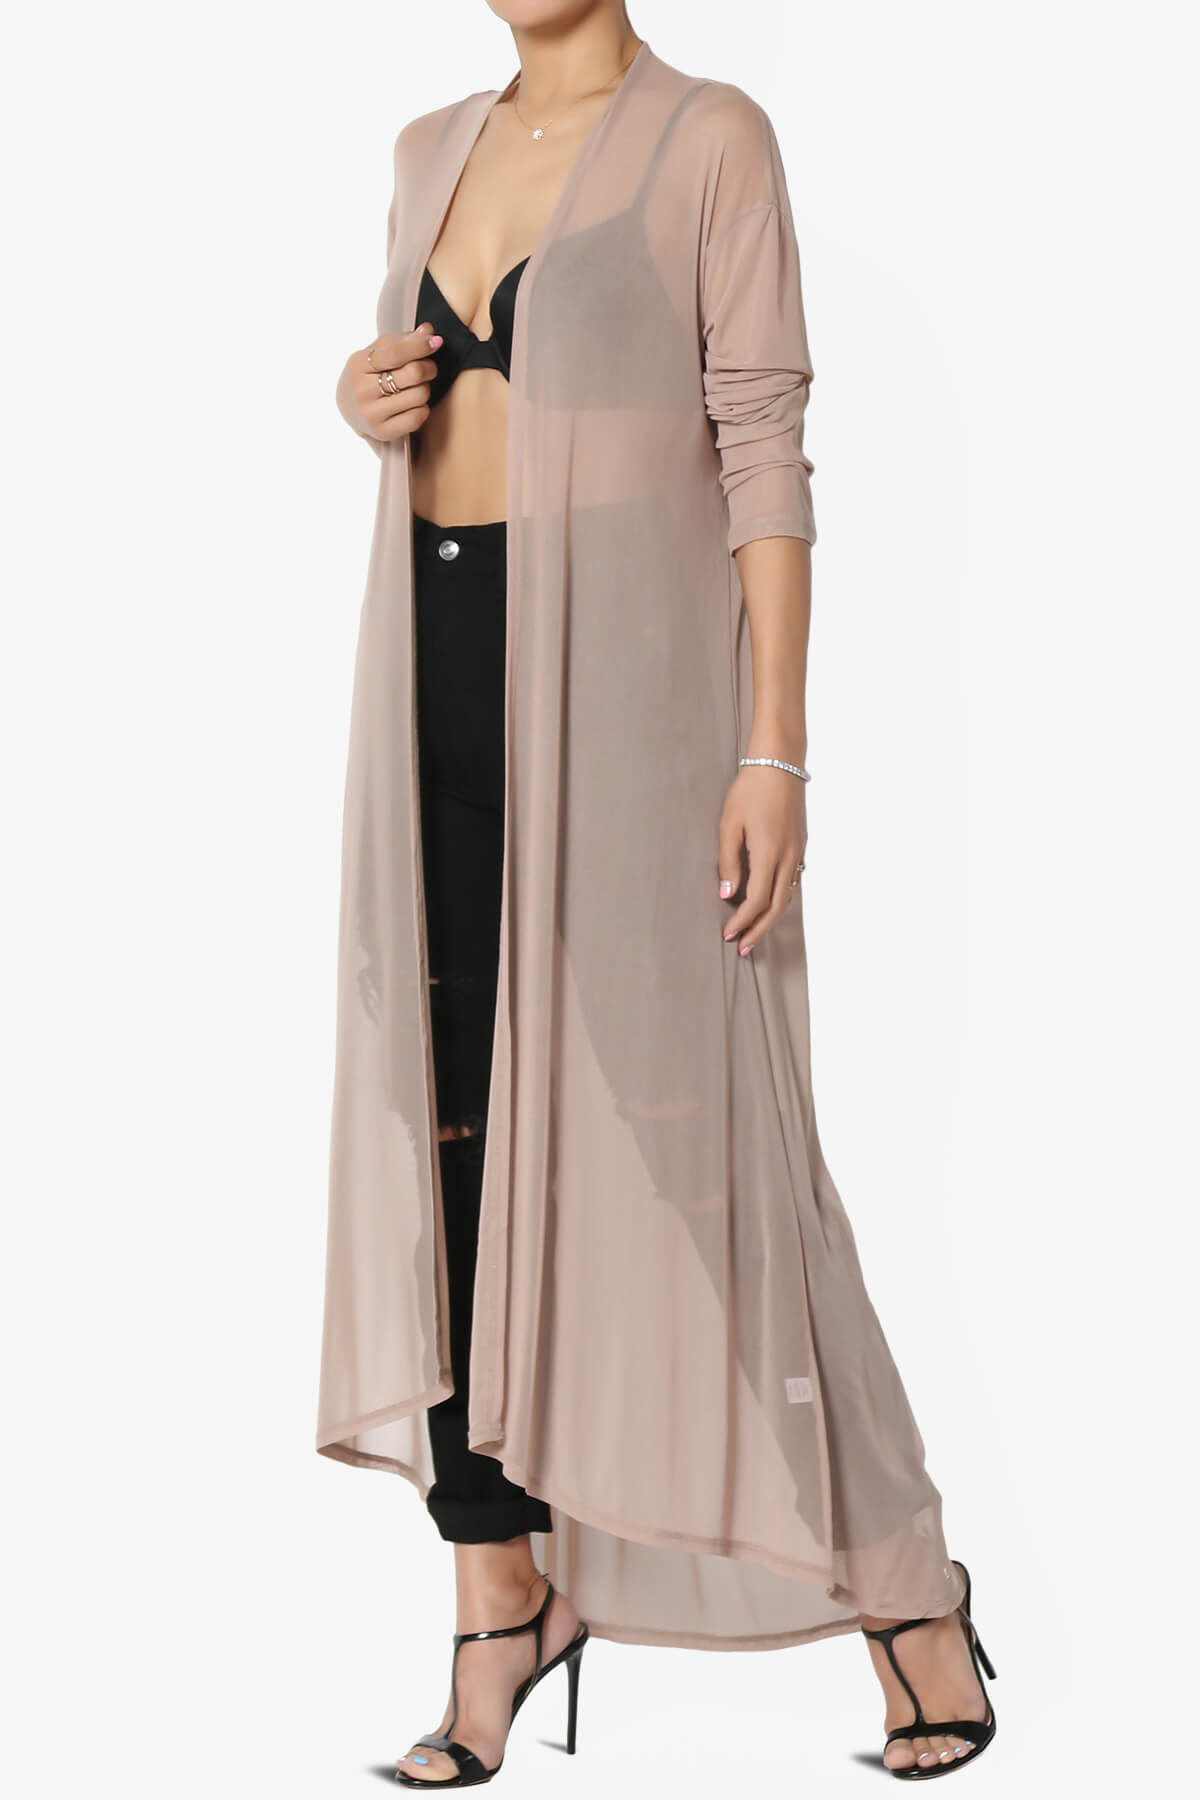 Load image into Gallery viewer, Moxxi Sheer Mesh Open Cardigan Duster LIGHT MOCHA_3
